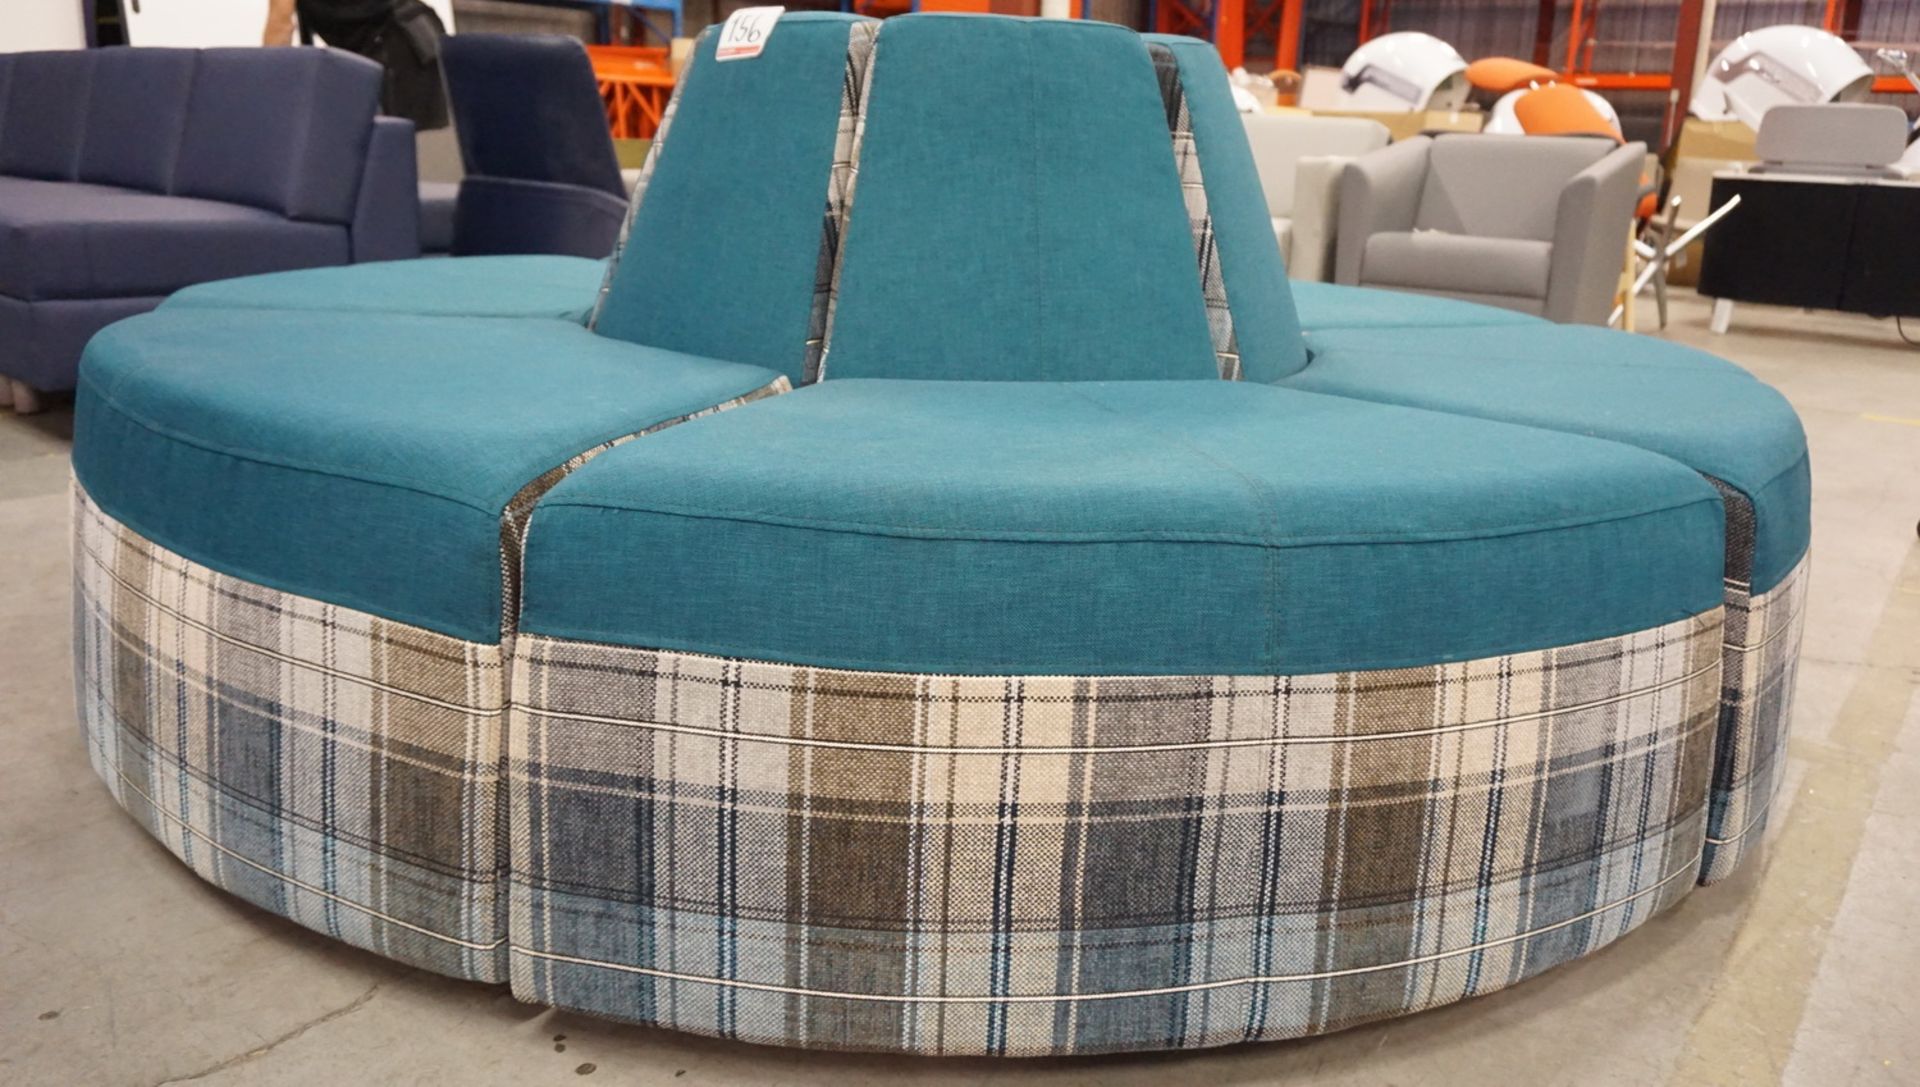 STEELCASE TURNSTONE APPROX. 76" DIA ROUND RECEPTION SOFA - Image 2 of 2